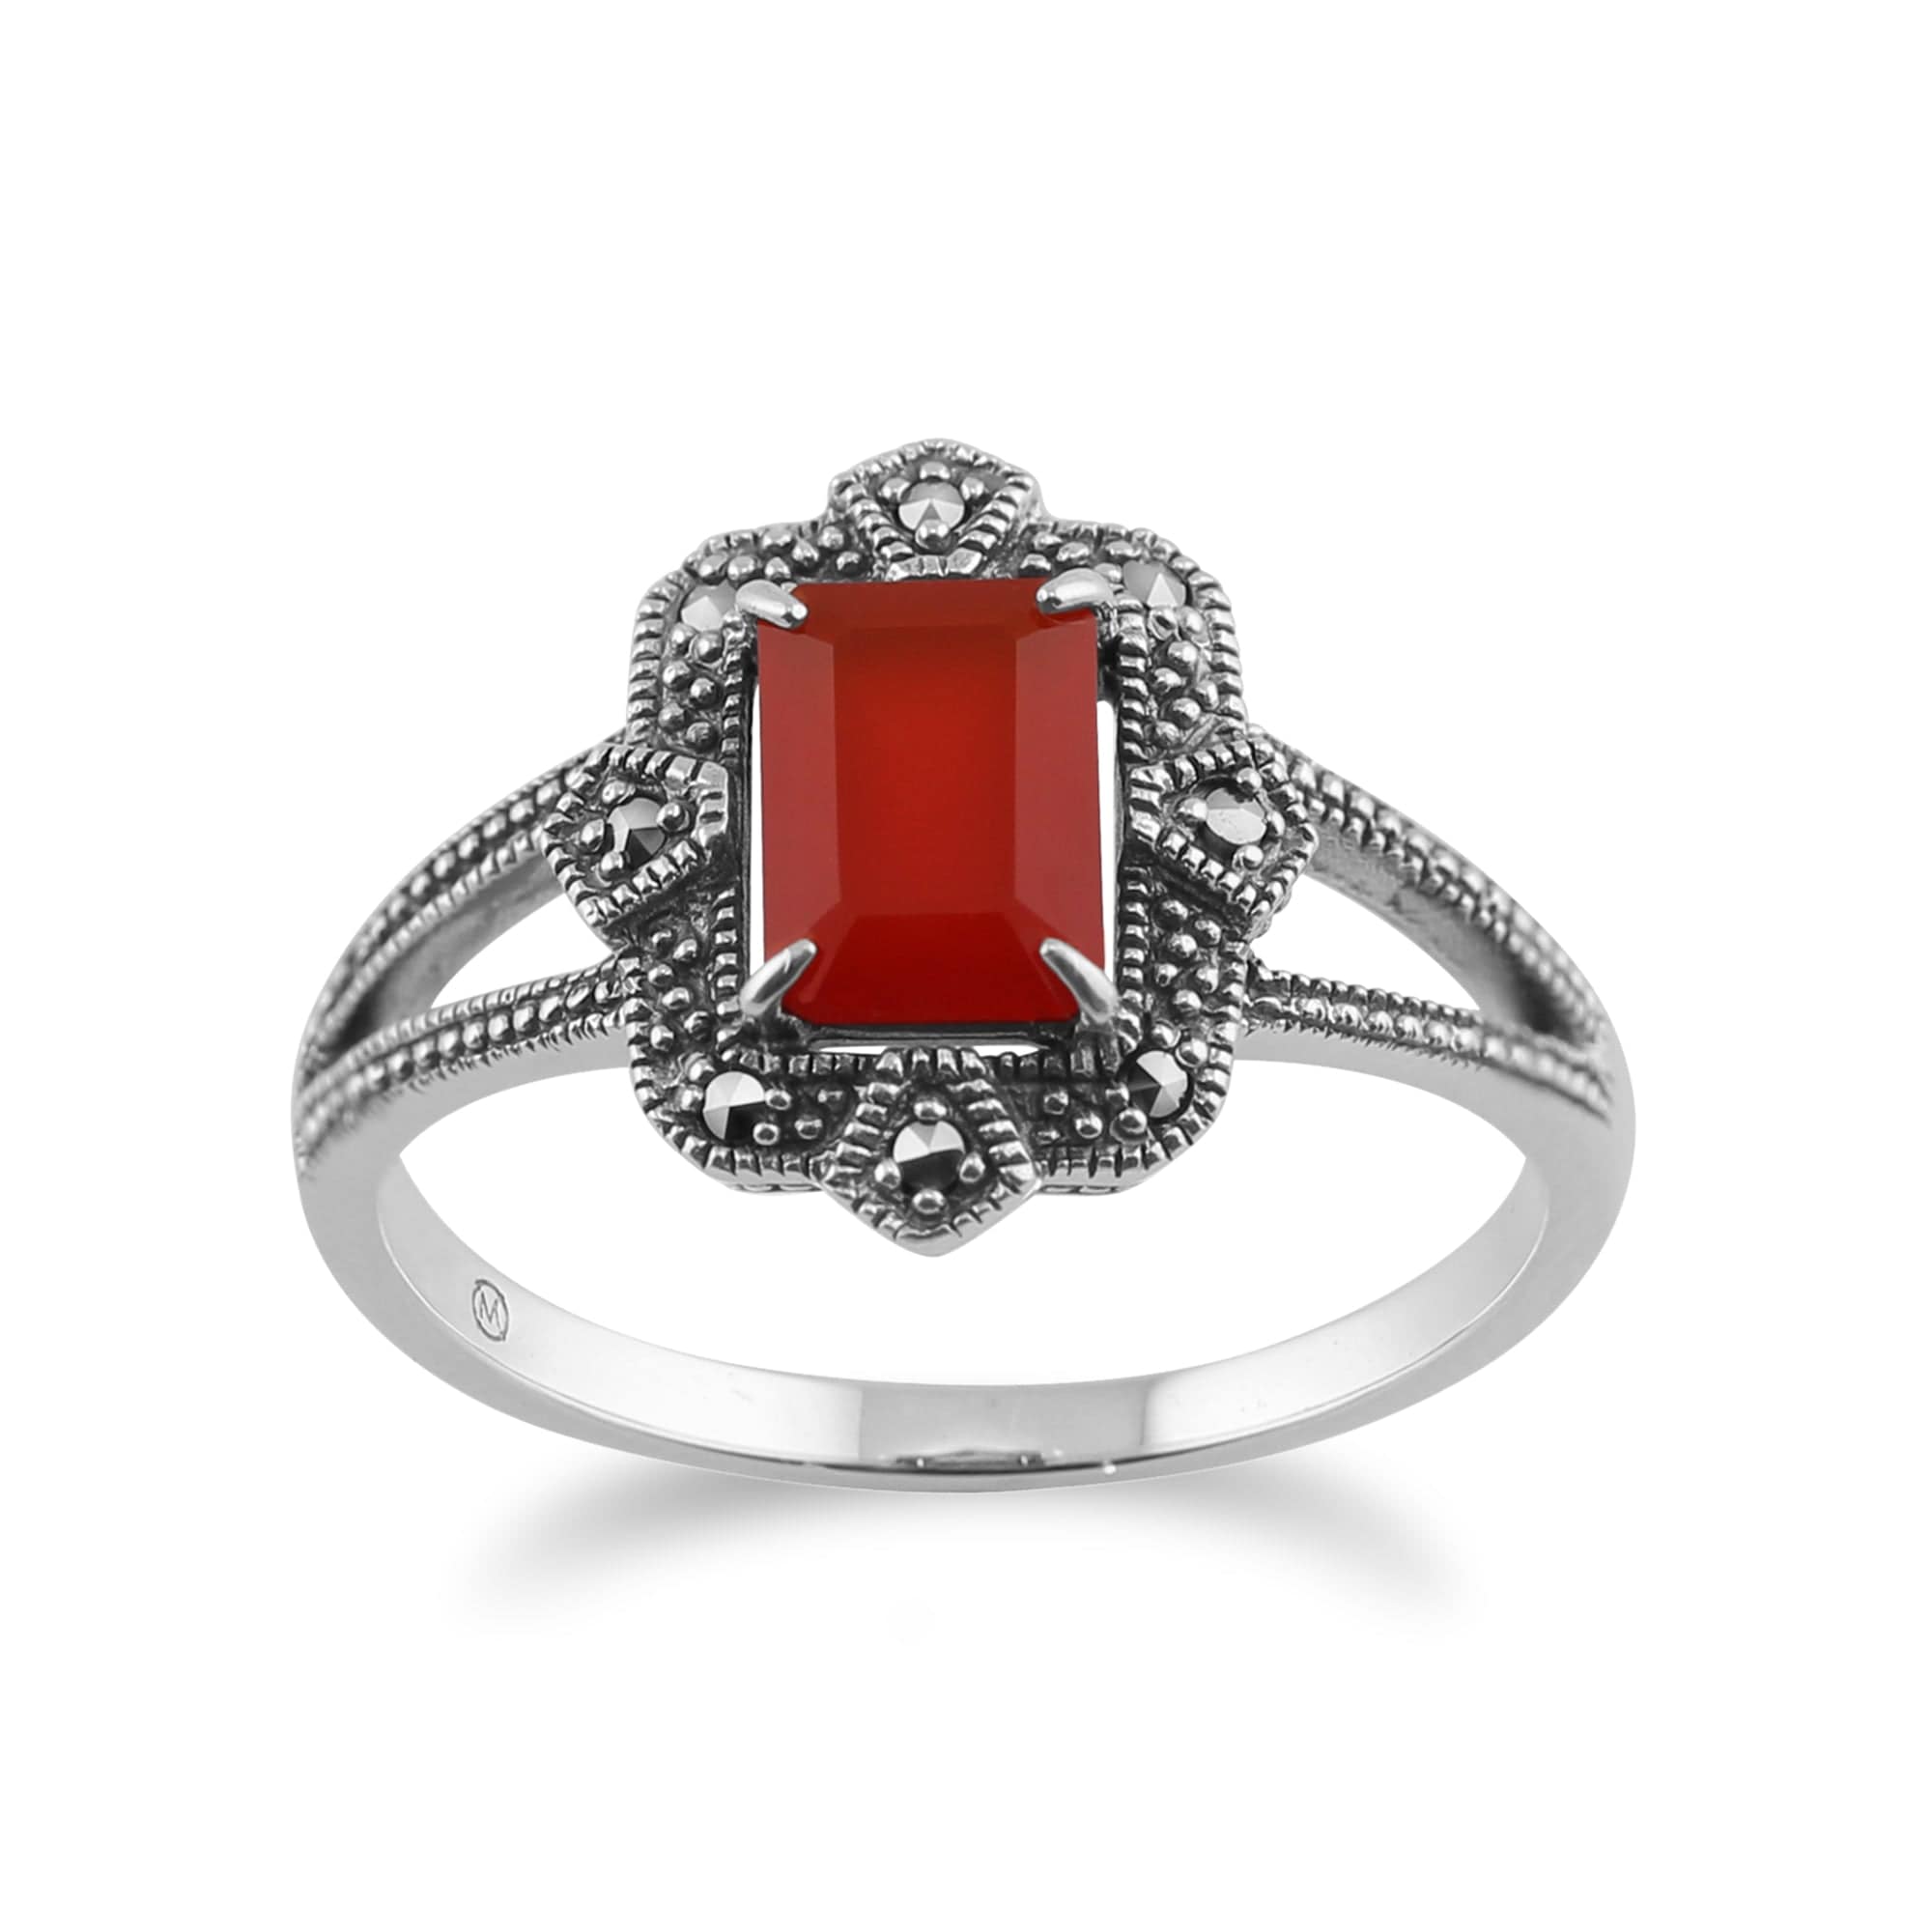 Image of Art Deco Style Baguette Carnelian & Marcasite Ring in 925 Sterling Silver